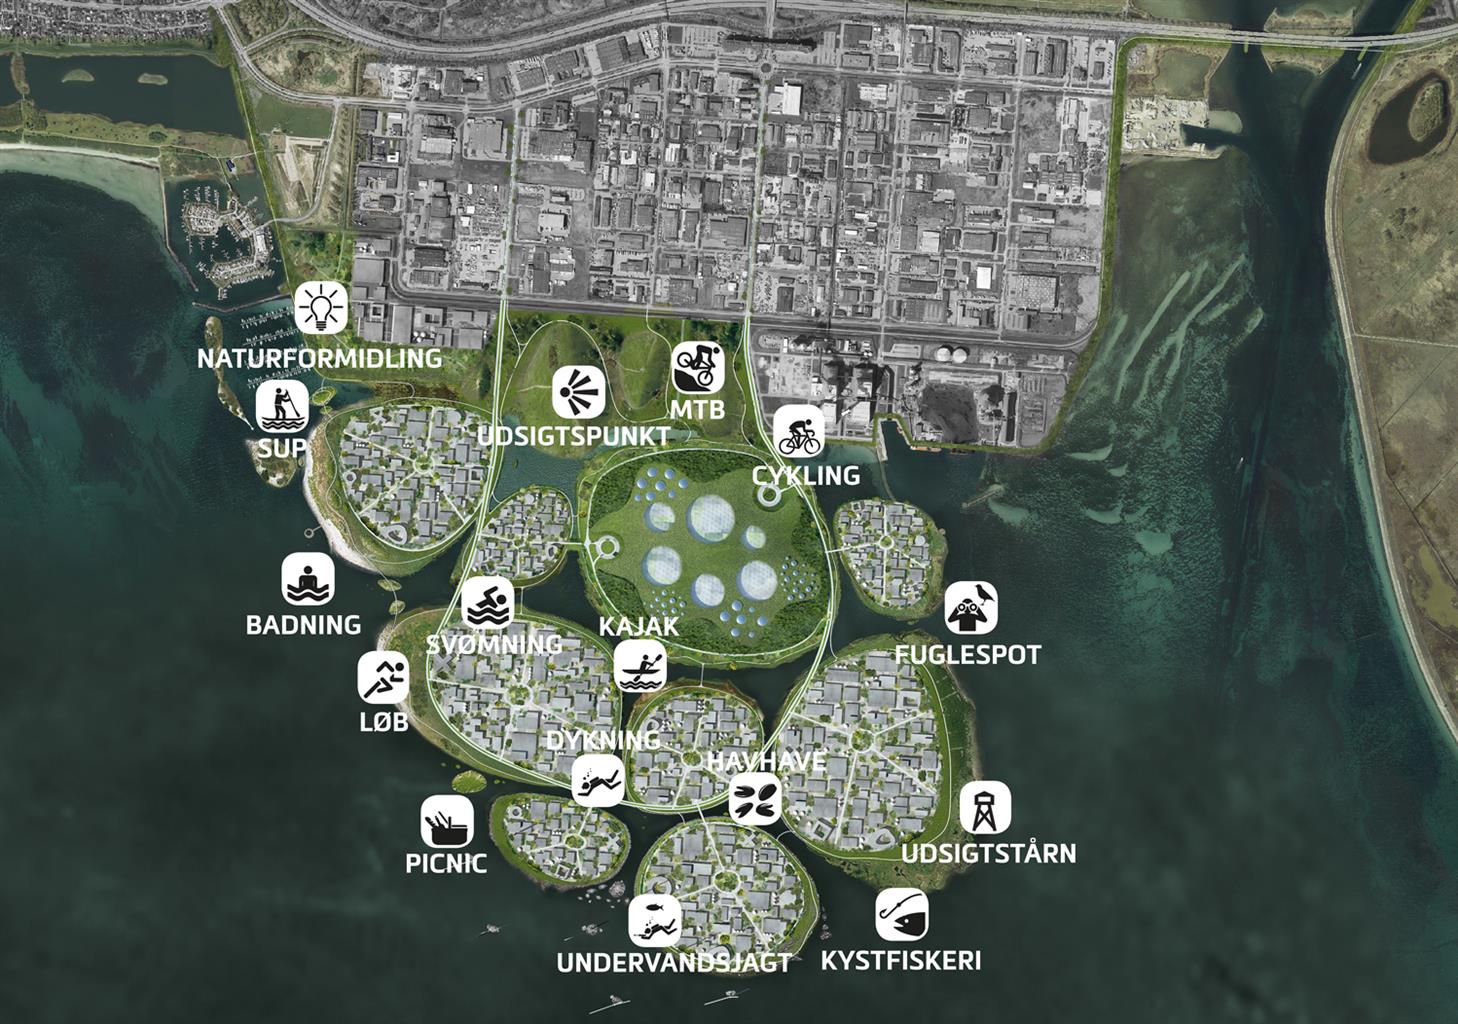 In a push to bring more clean energy to the city of Copenhagen, the Danish government has announced plans to build nine new artificial islands as part of what will become the largest and most ambitious land reclamation project in Scandinavia. Set to begin construction in 2022, the project, dubbed Holmene (the Islets), will comprise 3 million square meters of land and will be located just 10 kilometers south of Copenhagen. For more on this story, click ?